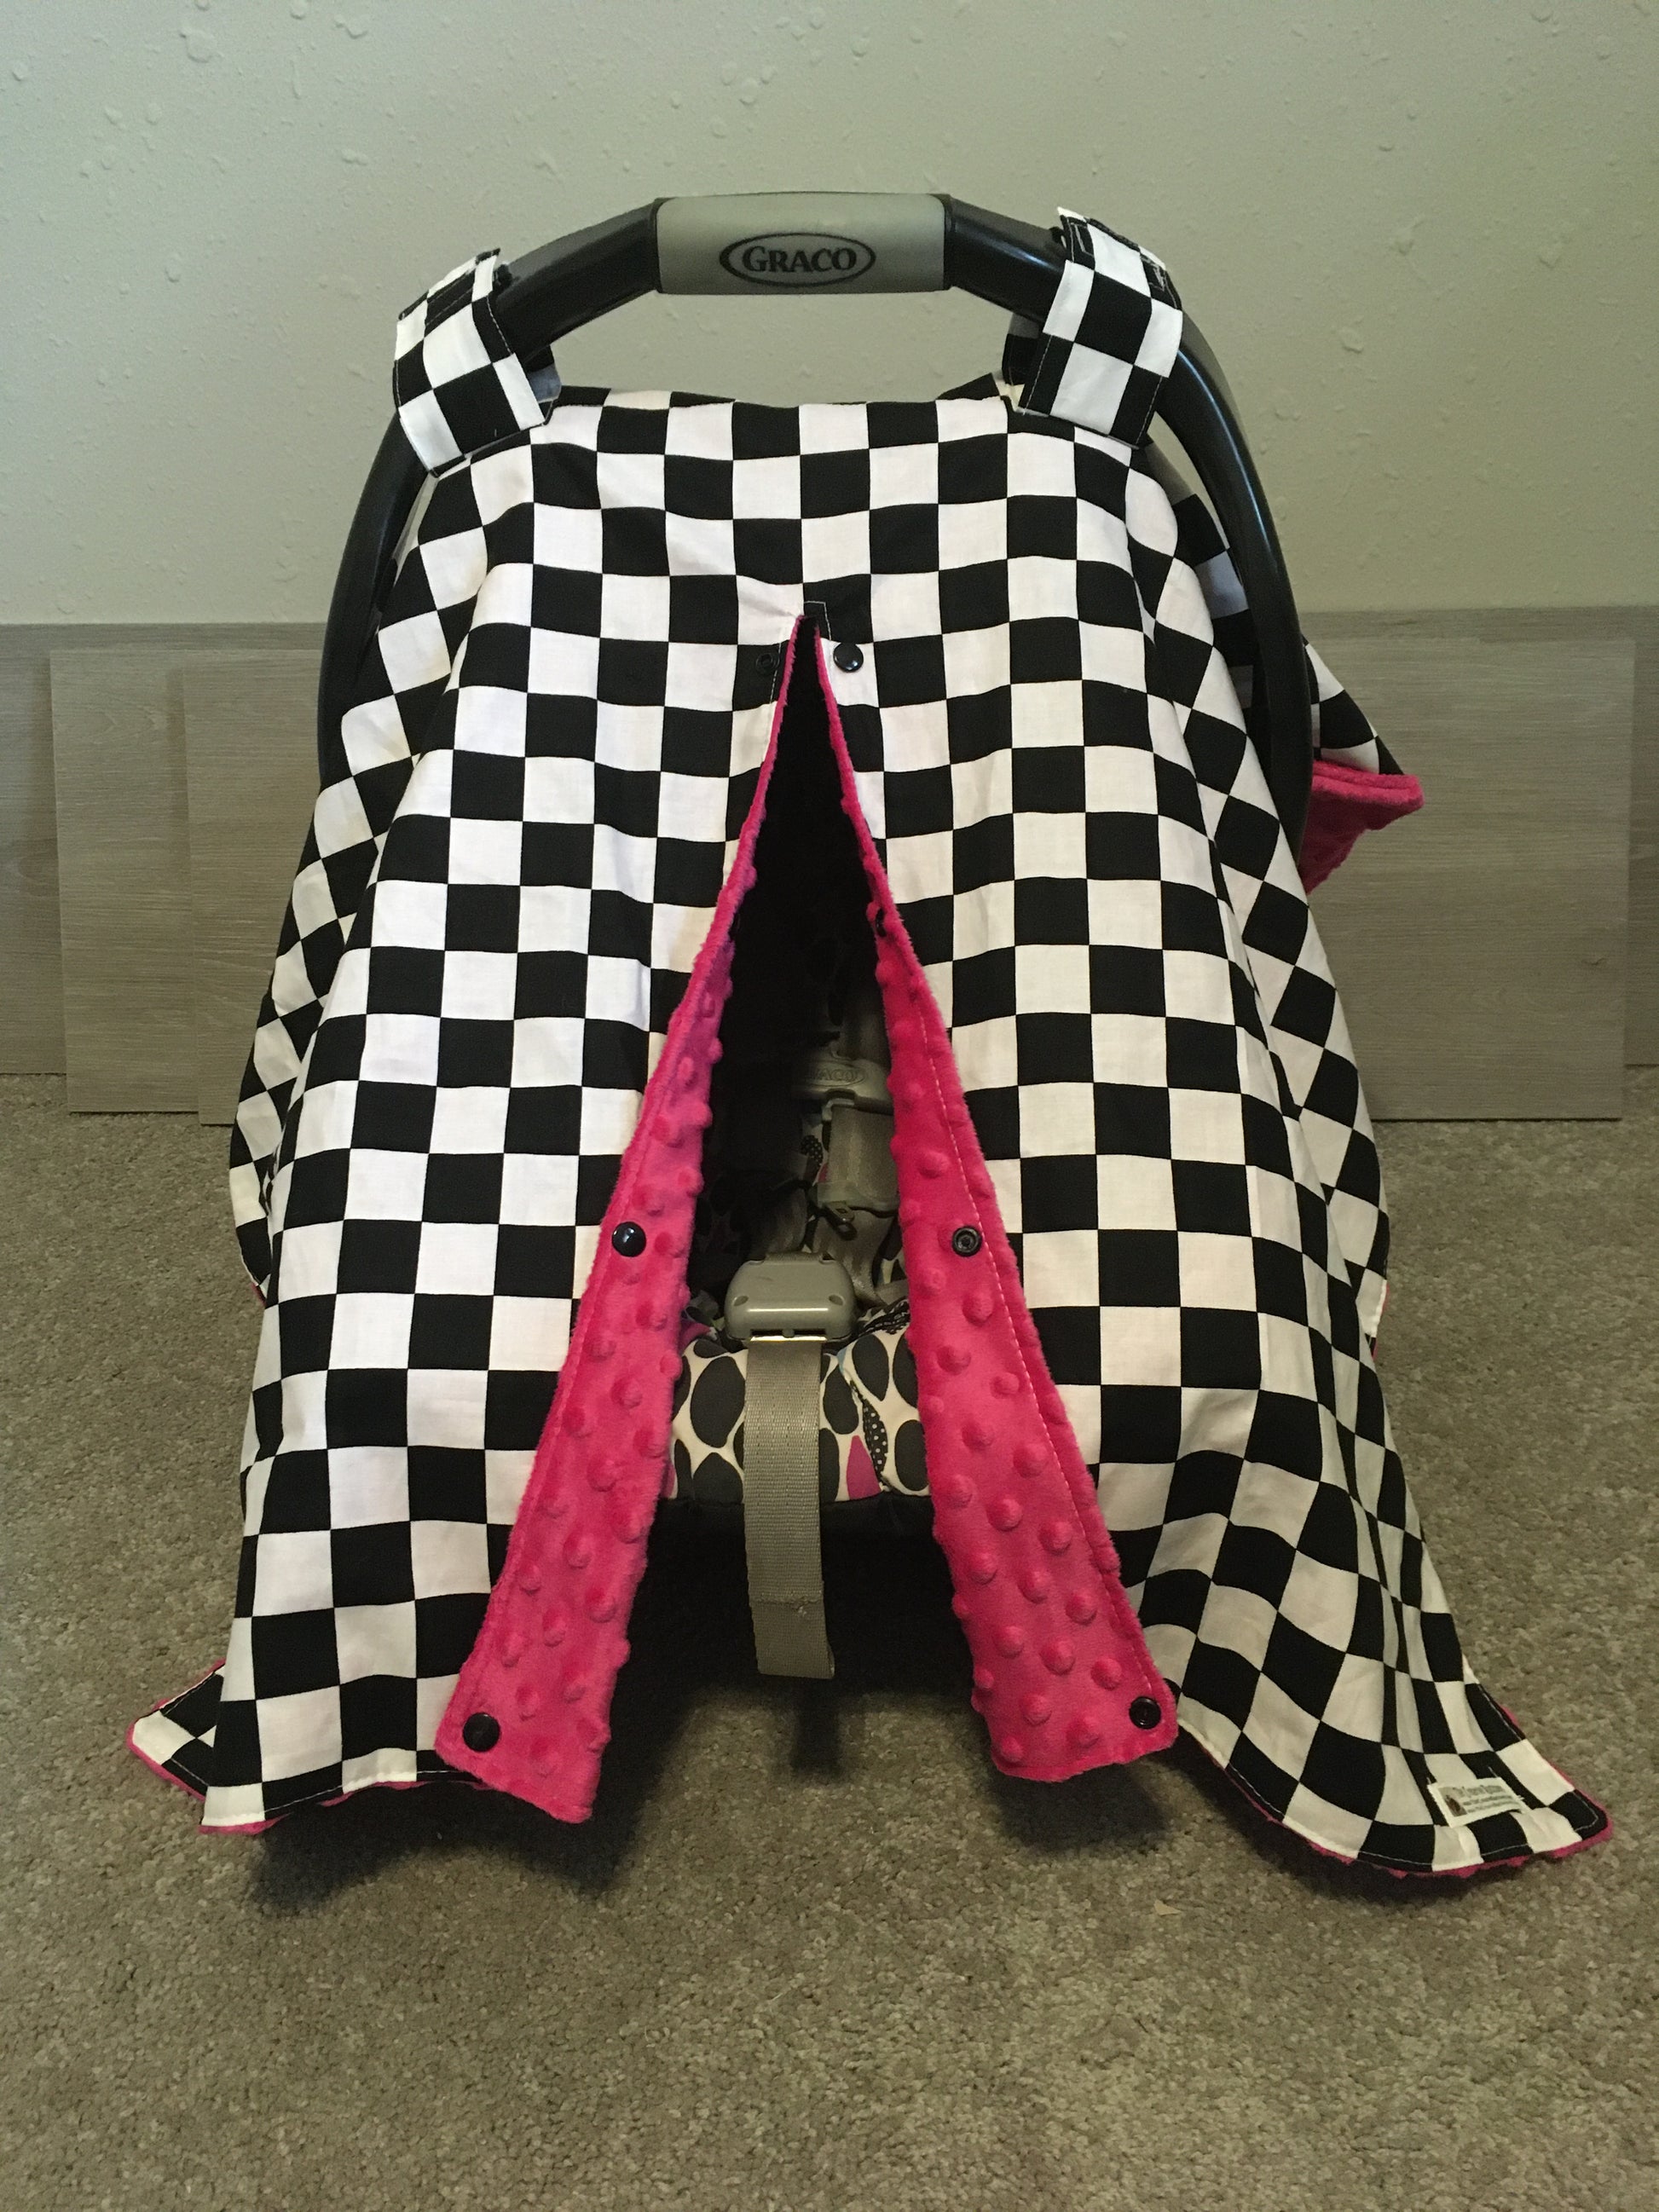 racing check car seat canopy shown in hot pink minky, in the open option